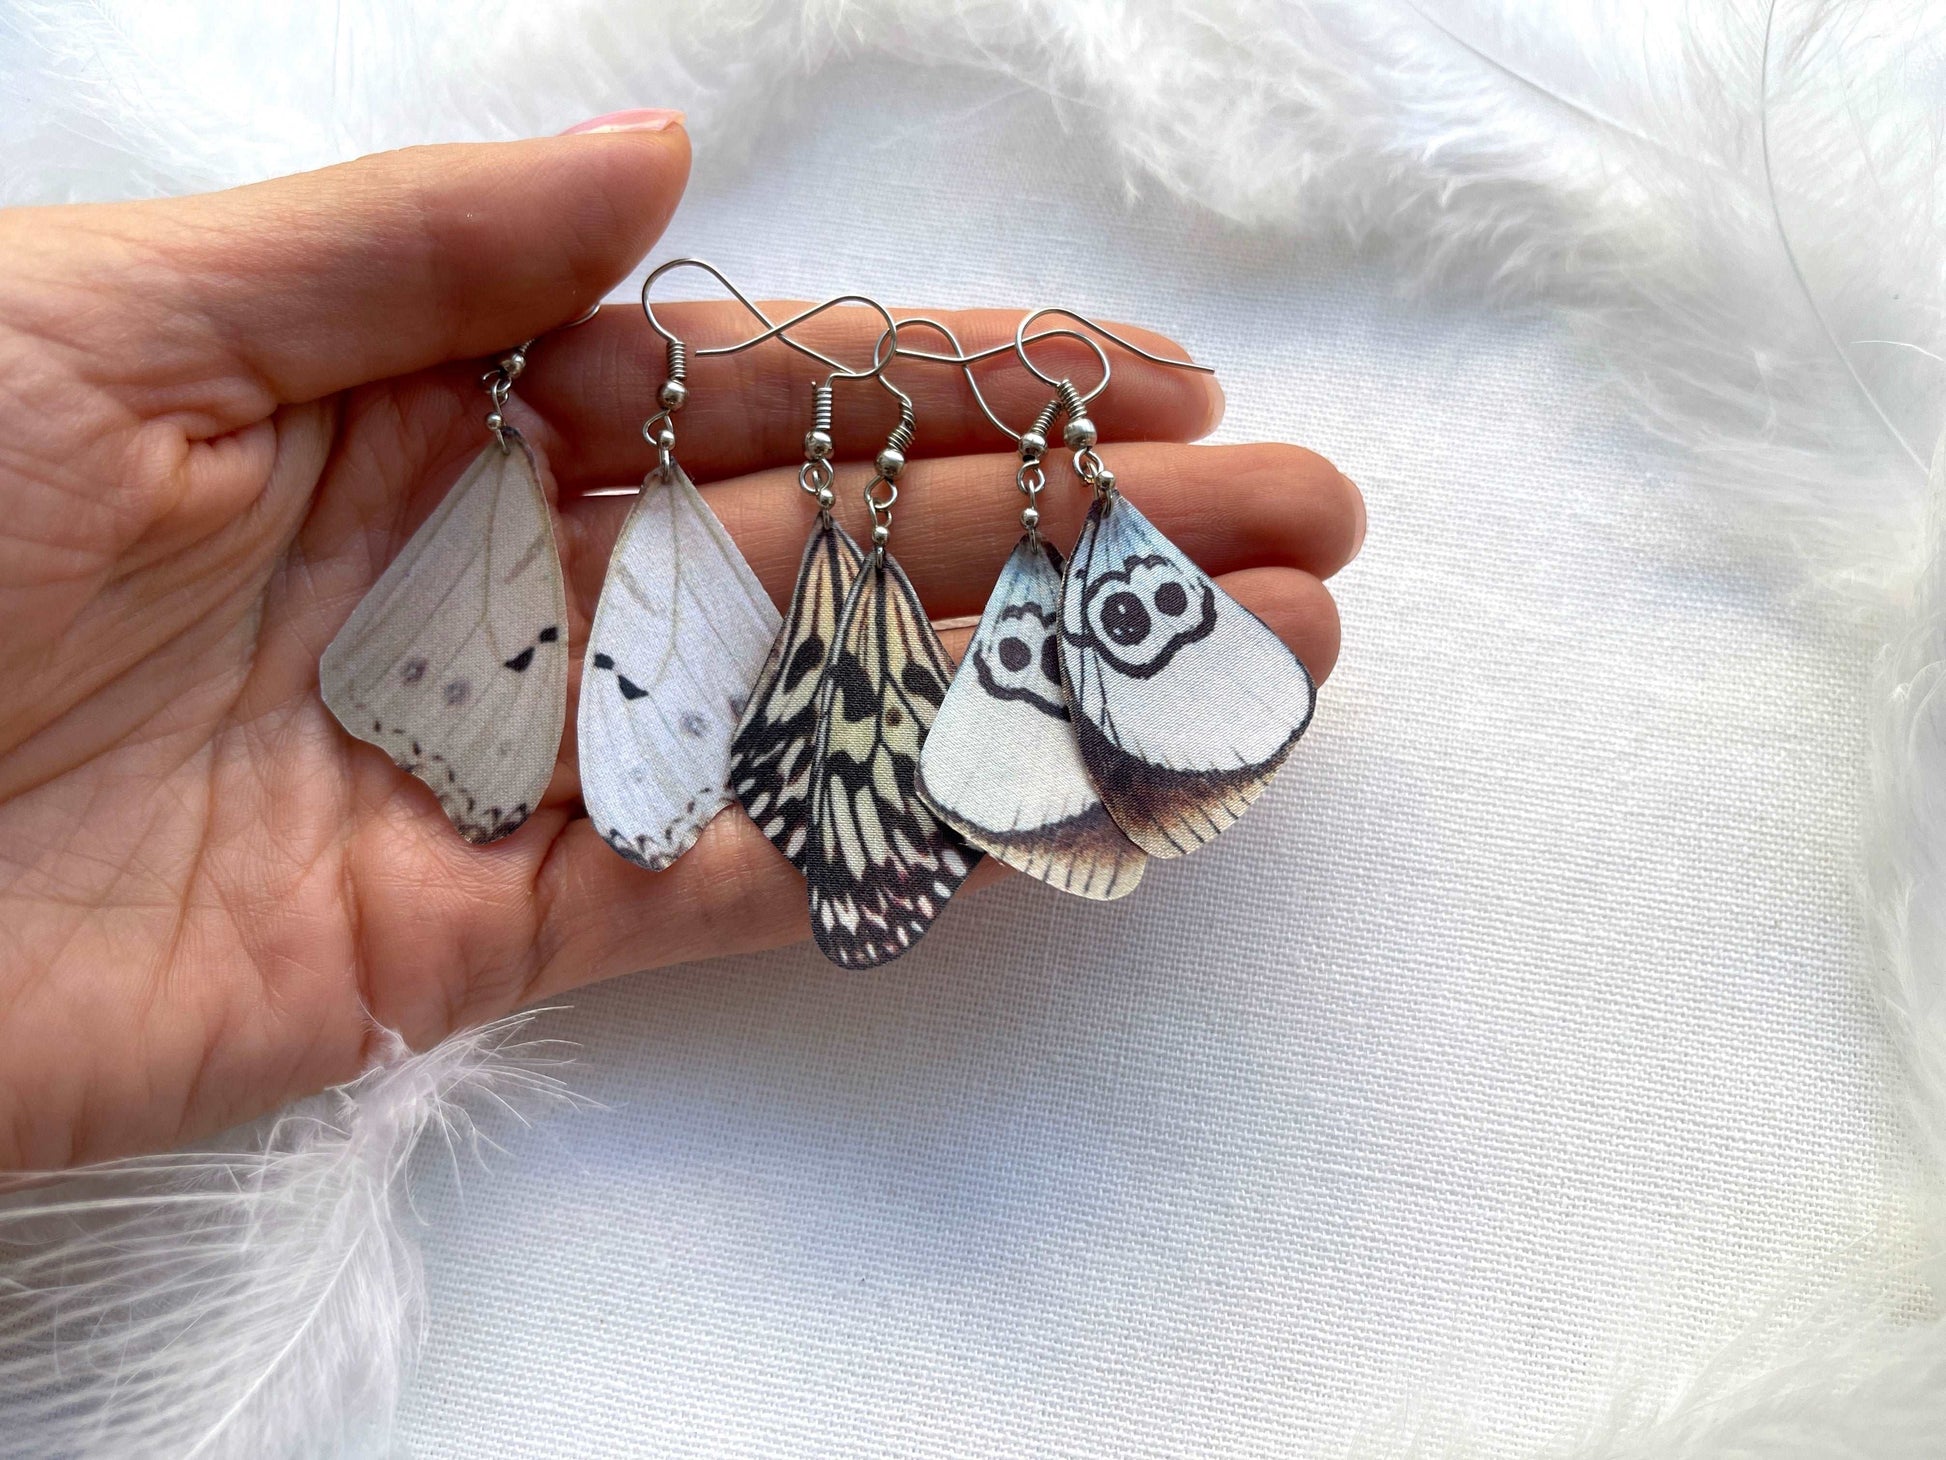 Boho Handmade Earrings with Beautiful Black and White Butterfly Wings